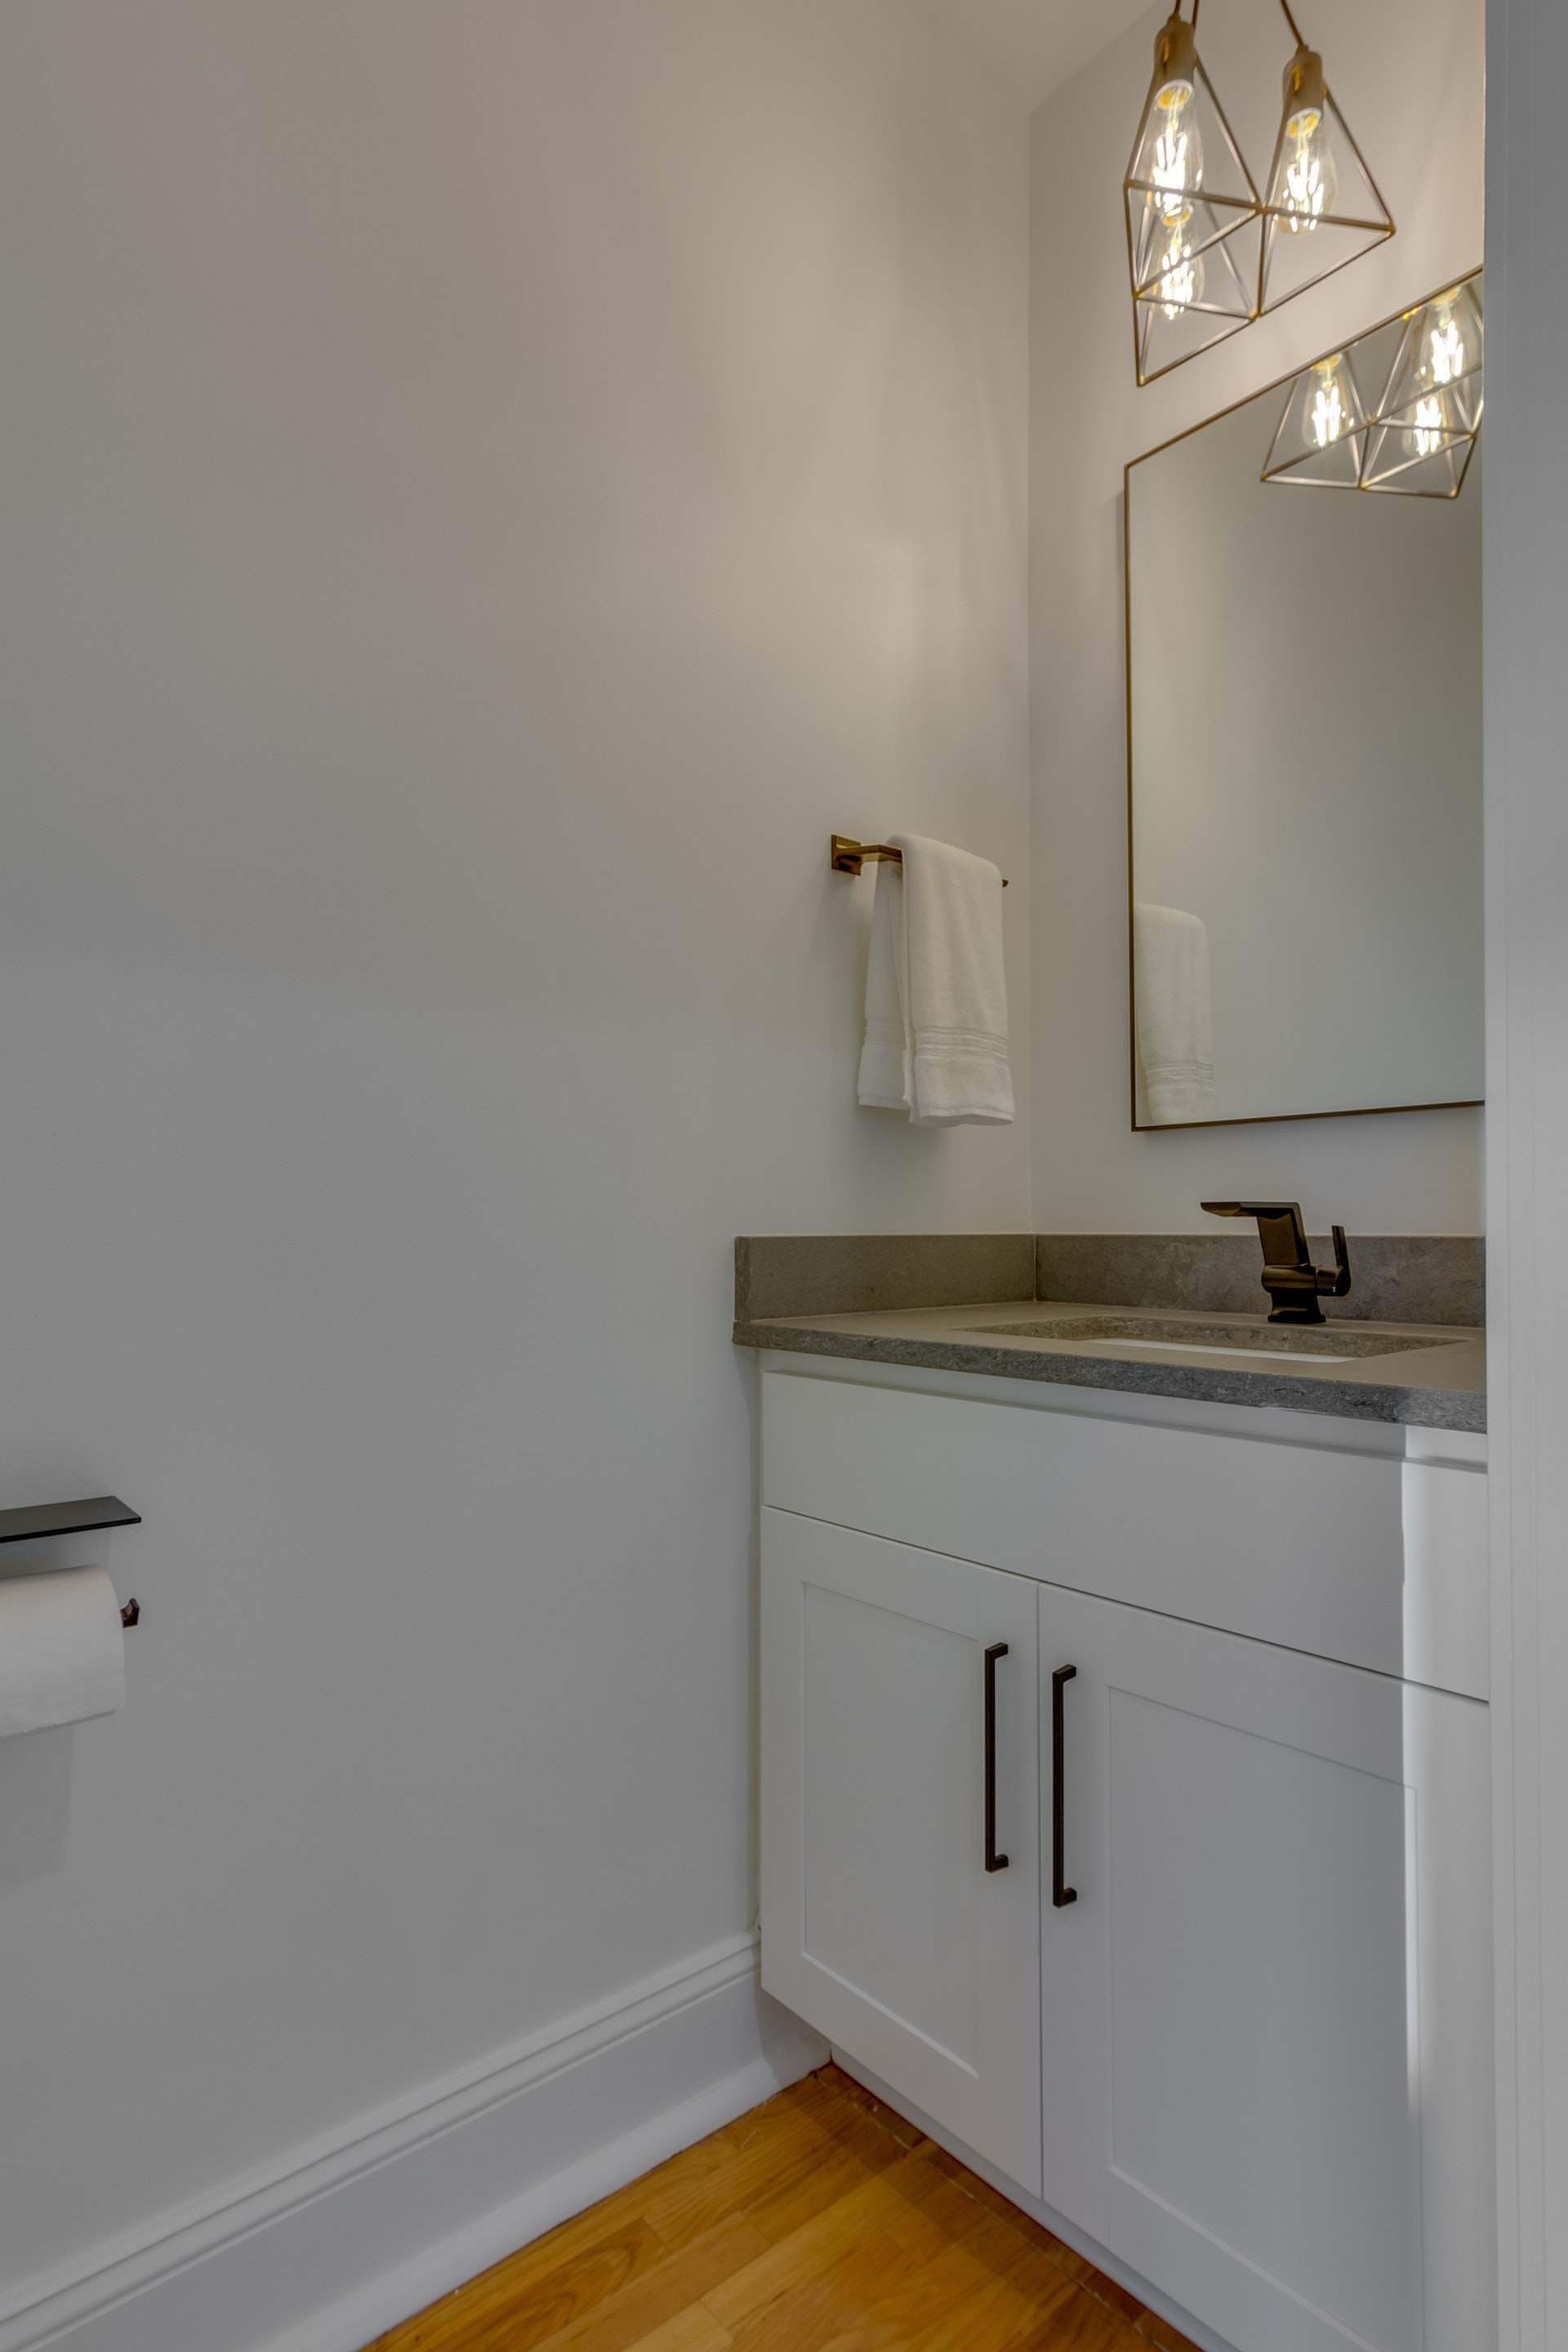 Bathroom with white walls light wood floors white cabinets gray countertops bronze framed mirror